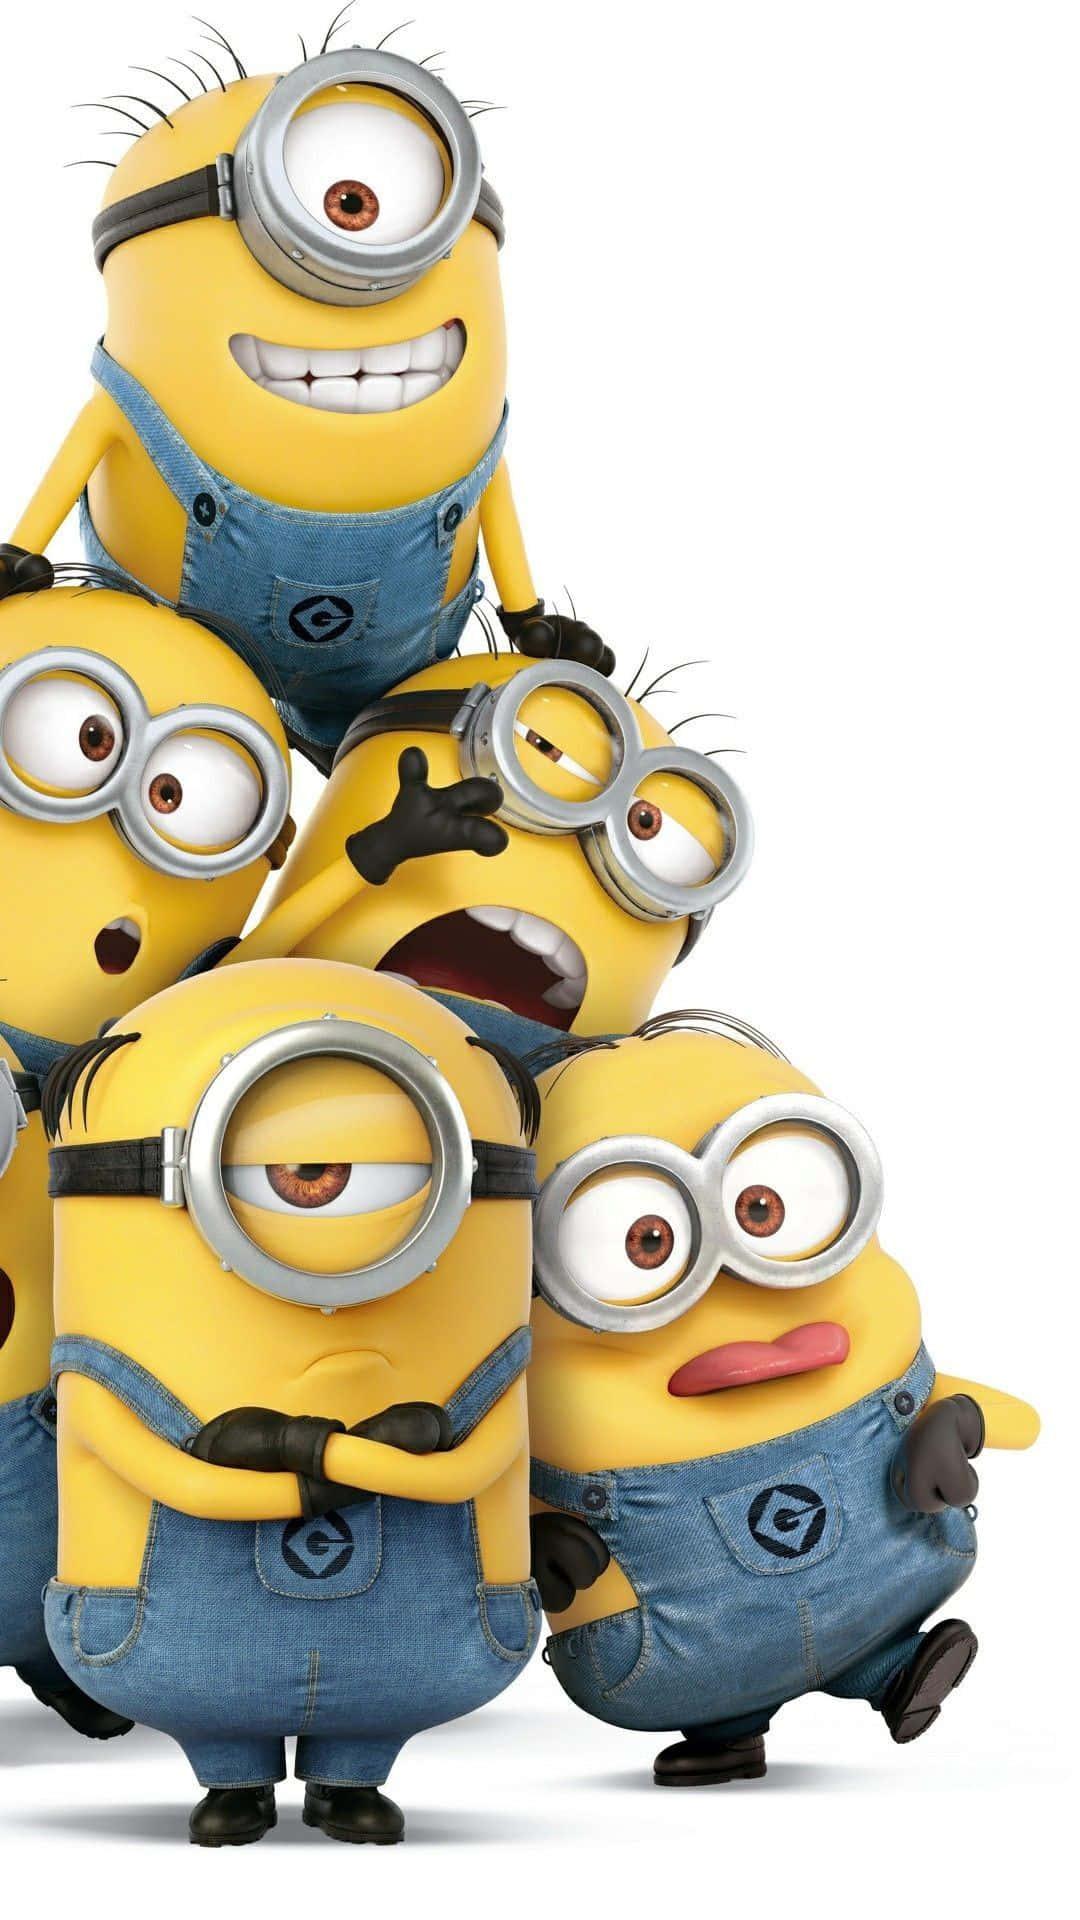 Have Fun with Minions!